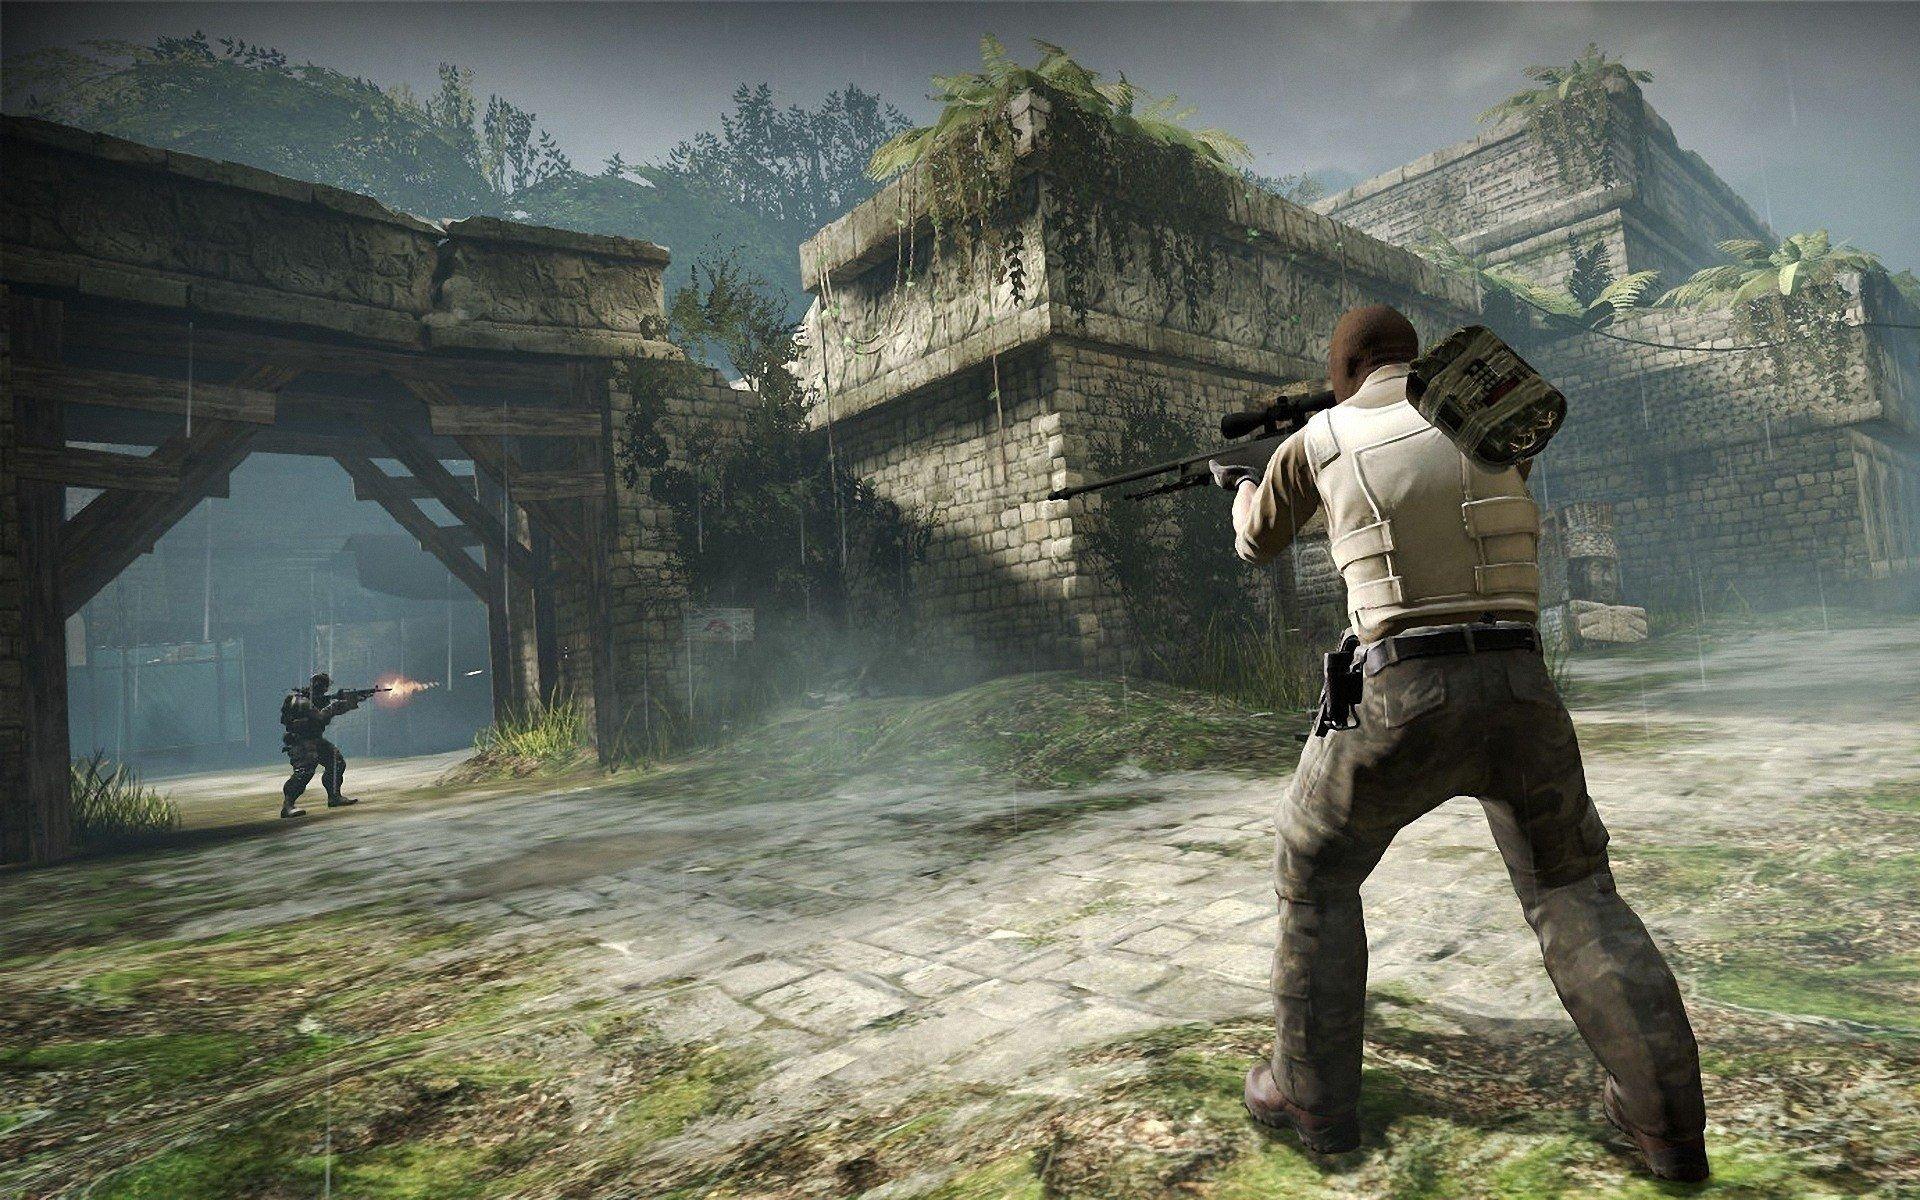 Counter Strike: Global Offensive HD Wallpaper. Background